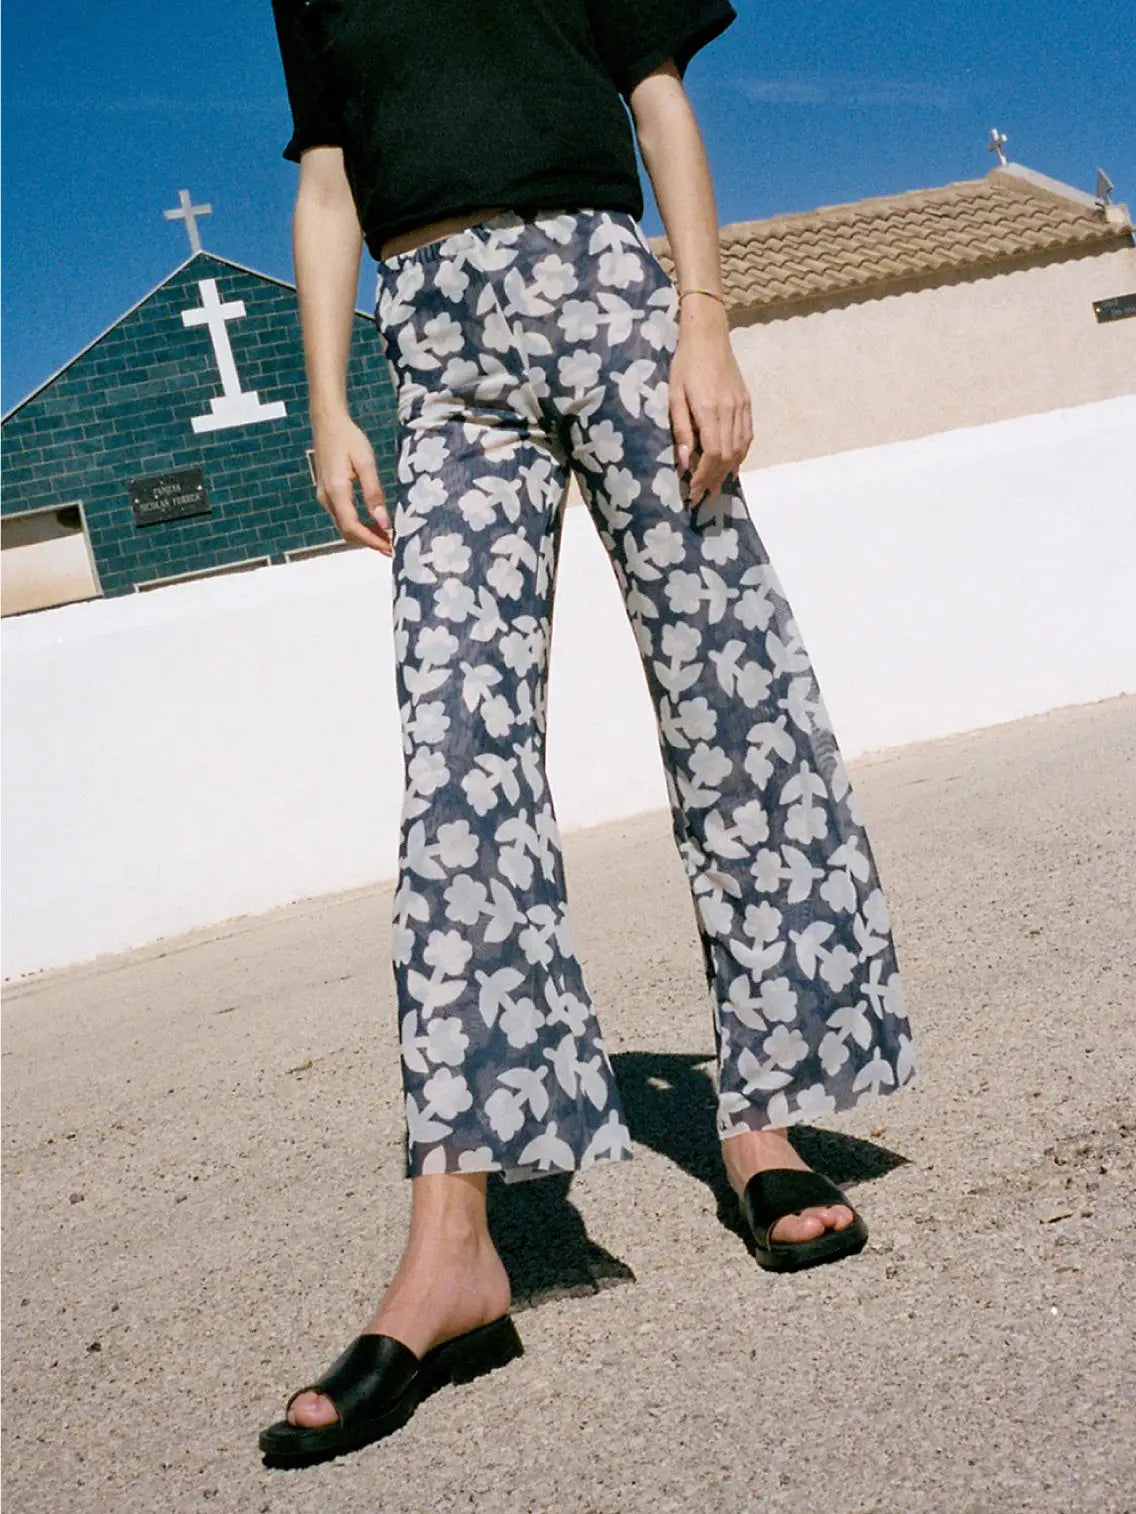 A pair of Recycled Tulle Pants Blue by Mundaka with a dark blue background and a white floral pattern spread evenly across the fabric, available at Bassalstore in Barcelona. The pants feature an elastic waistband at the top.